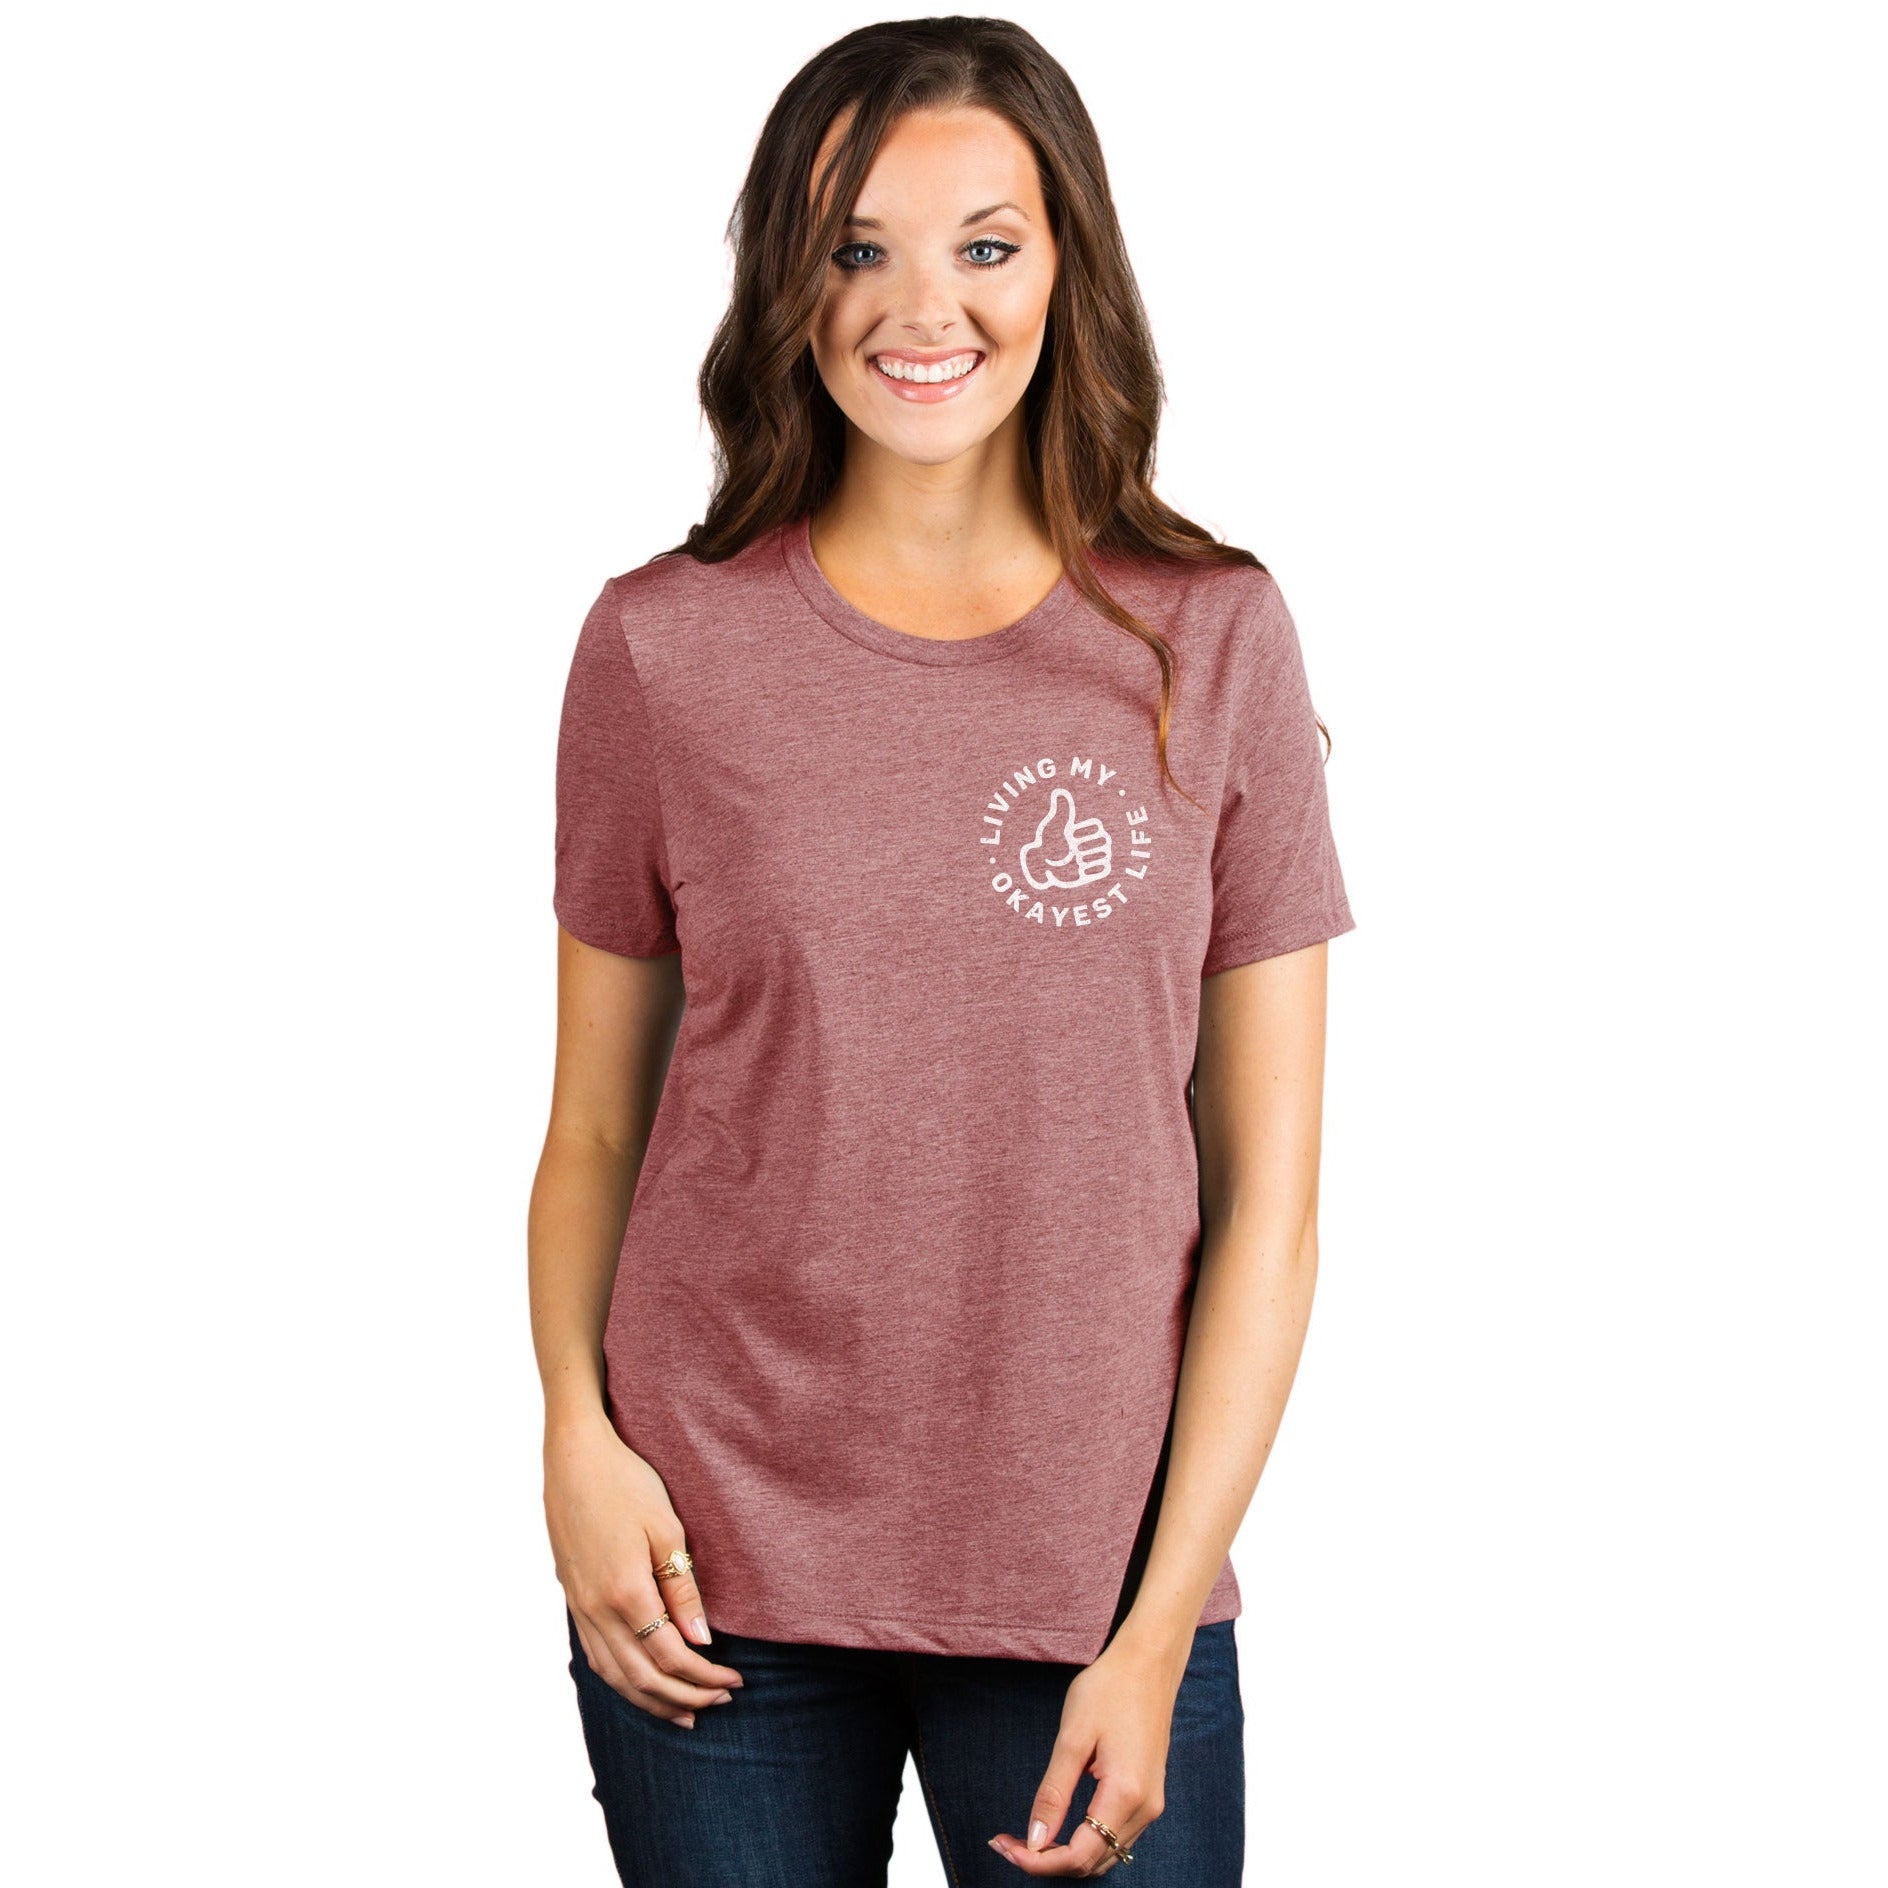 Living My Okayest Life Women's Relaxed Crewneck T-Shirt Top Tee Heather Rouge Model
